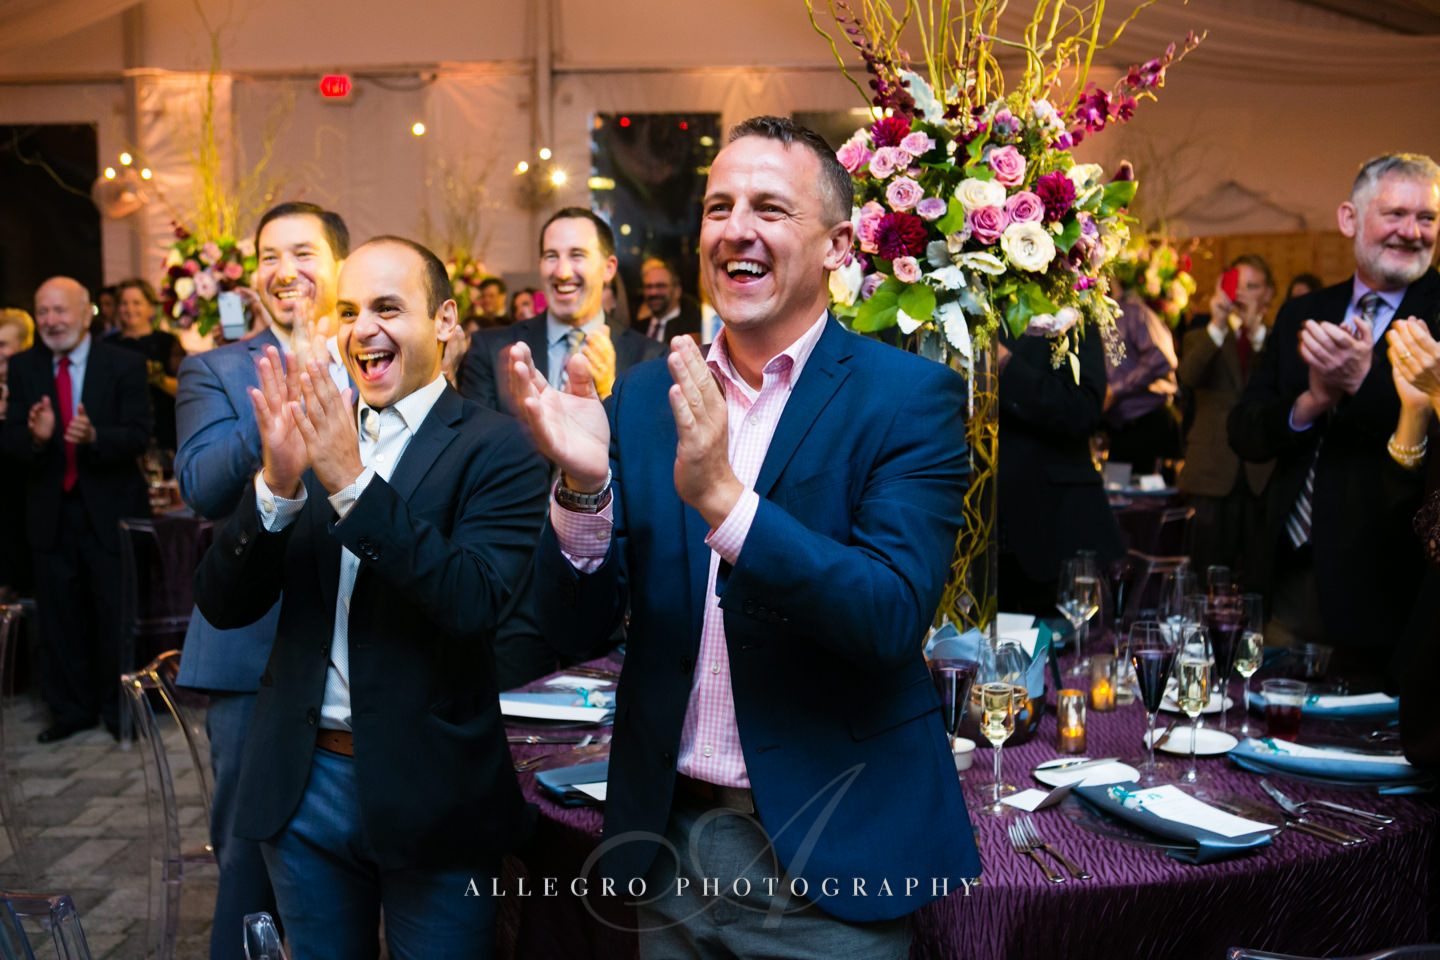 guests - photo by Allegro Photography